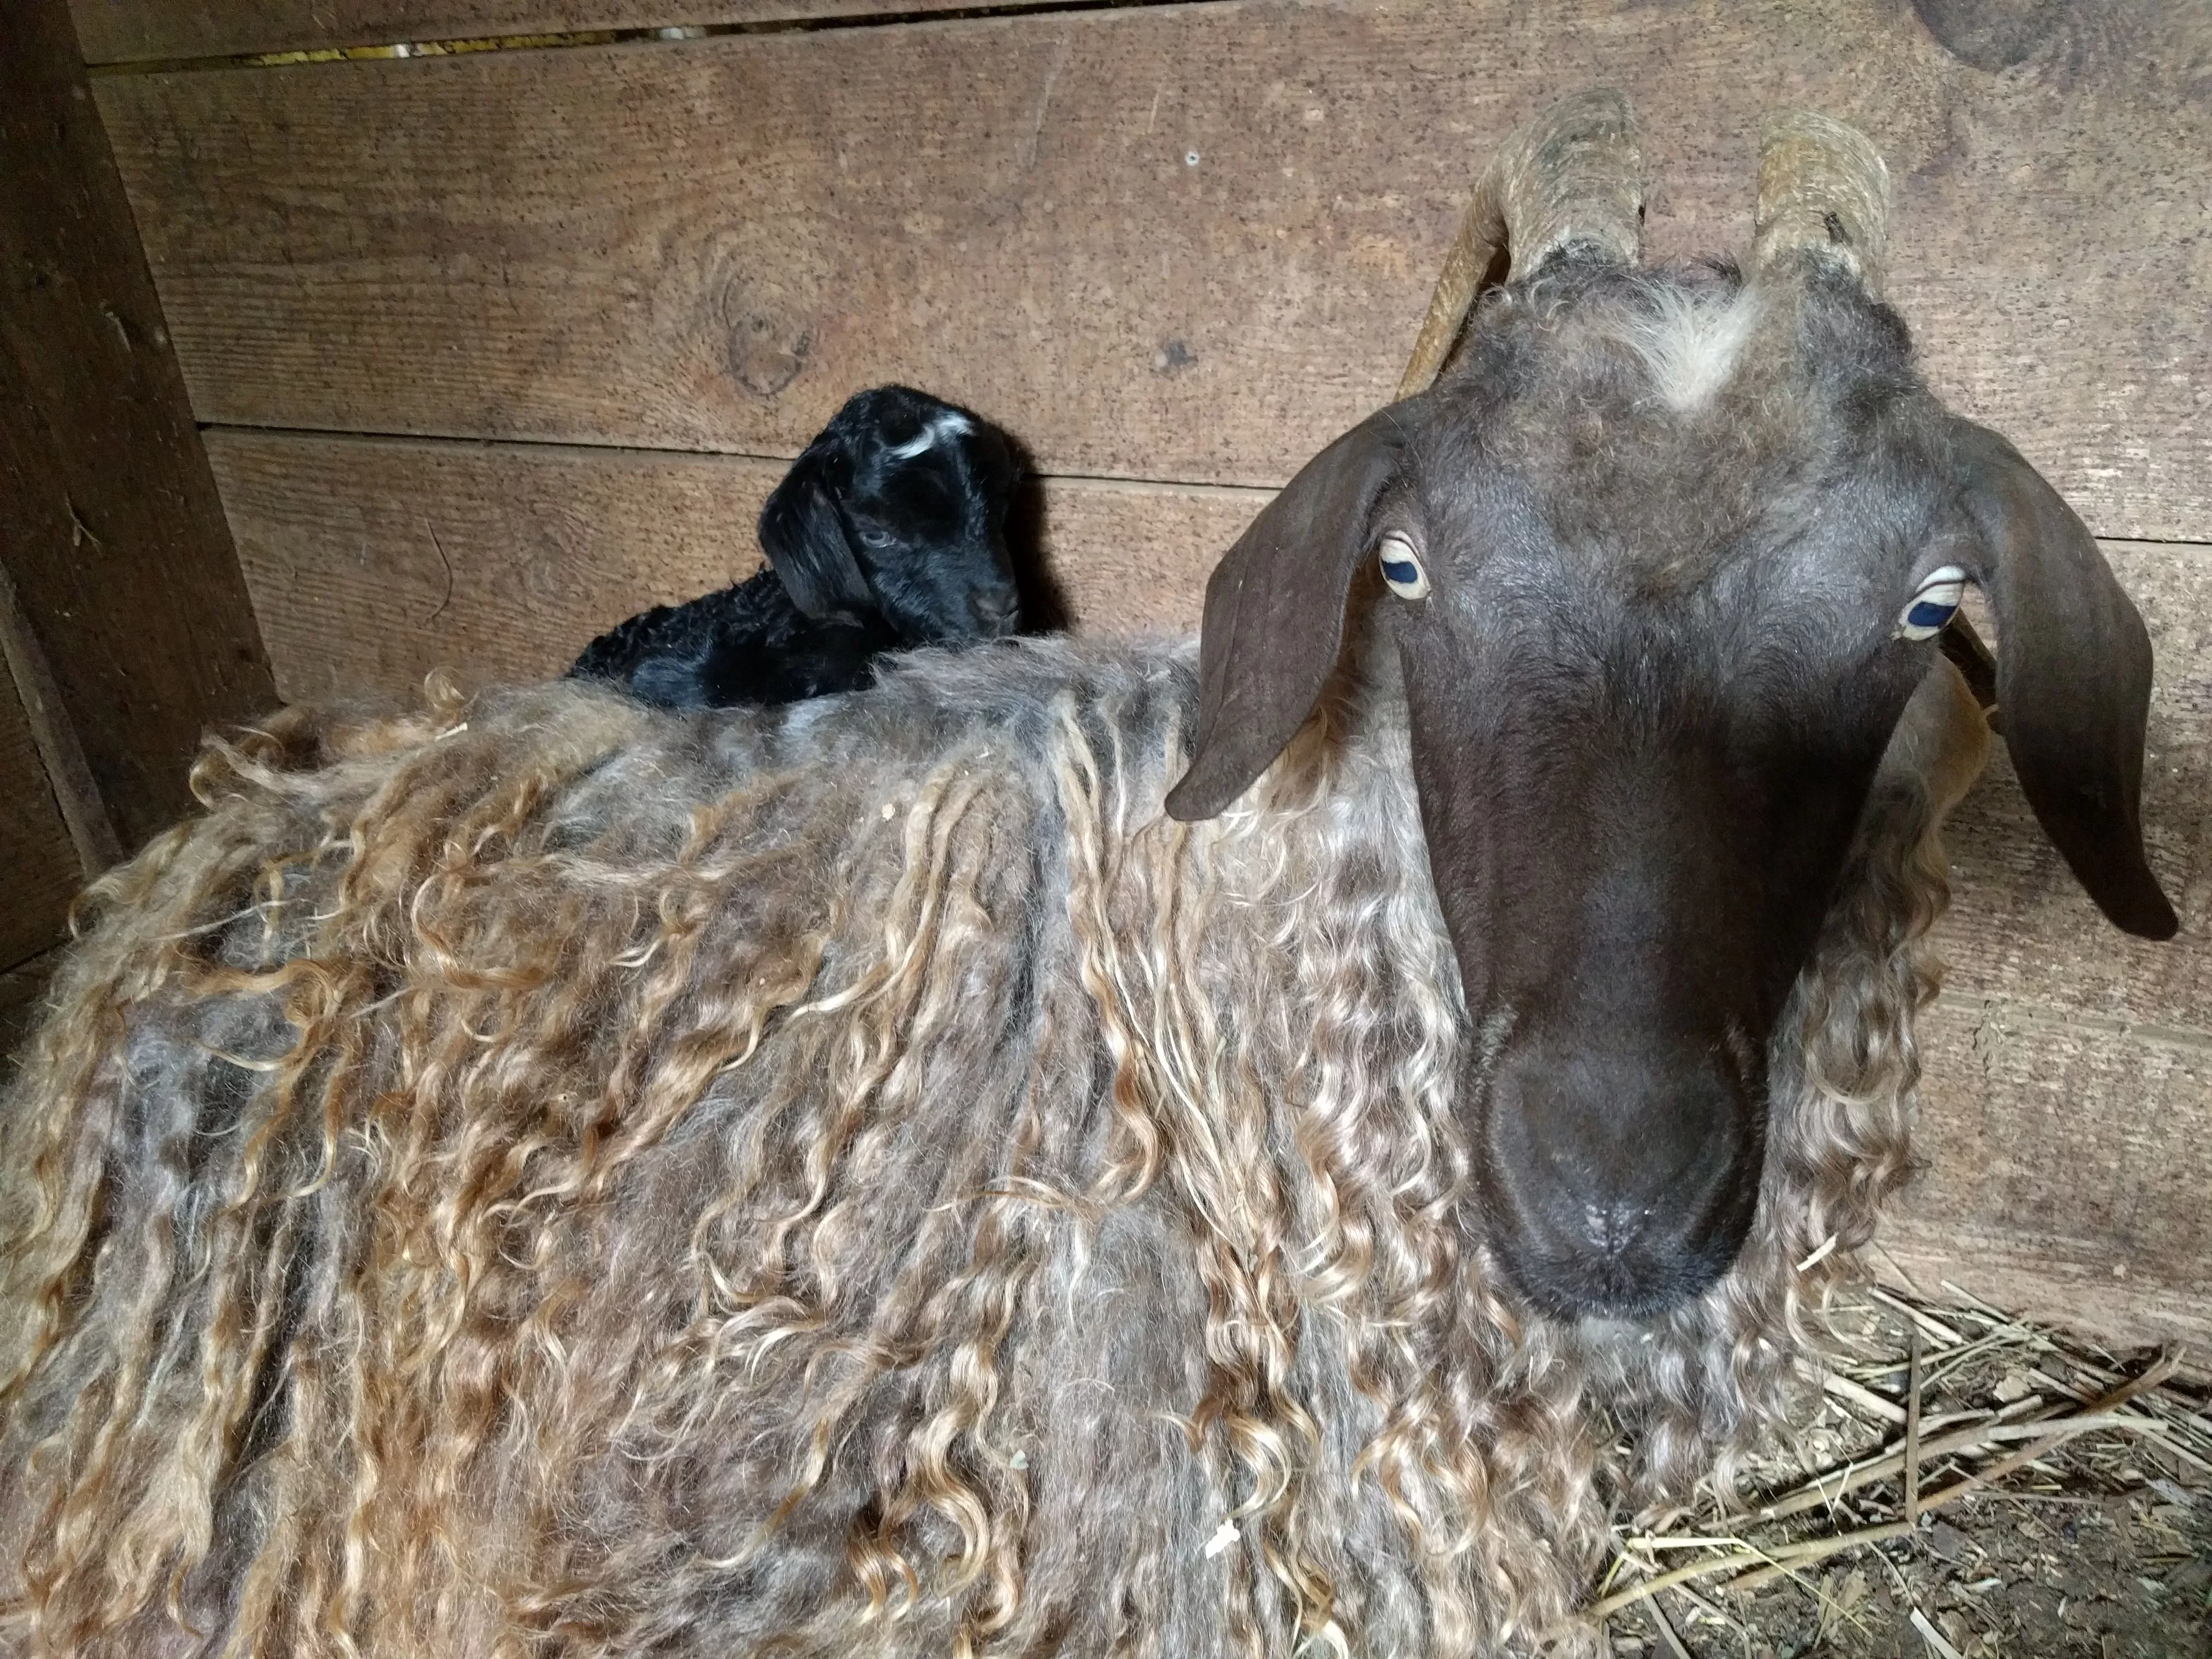 An image of a goat named Daphne with her newborn kid, Freddie